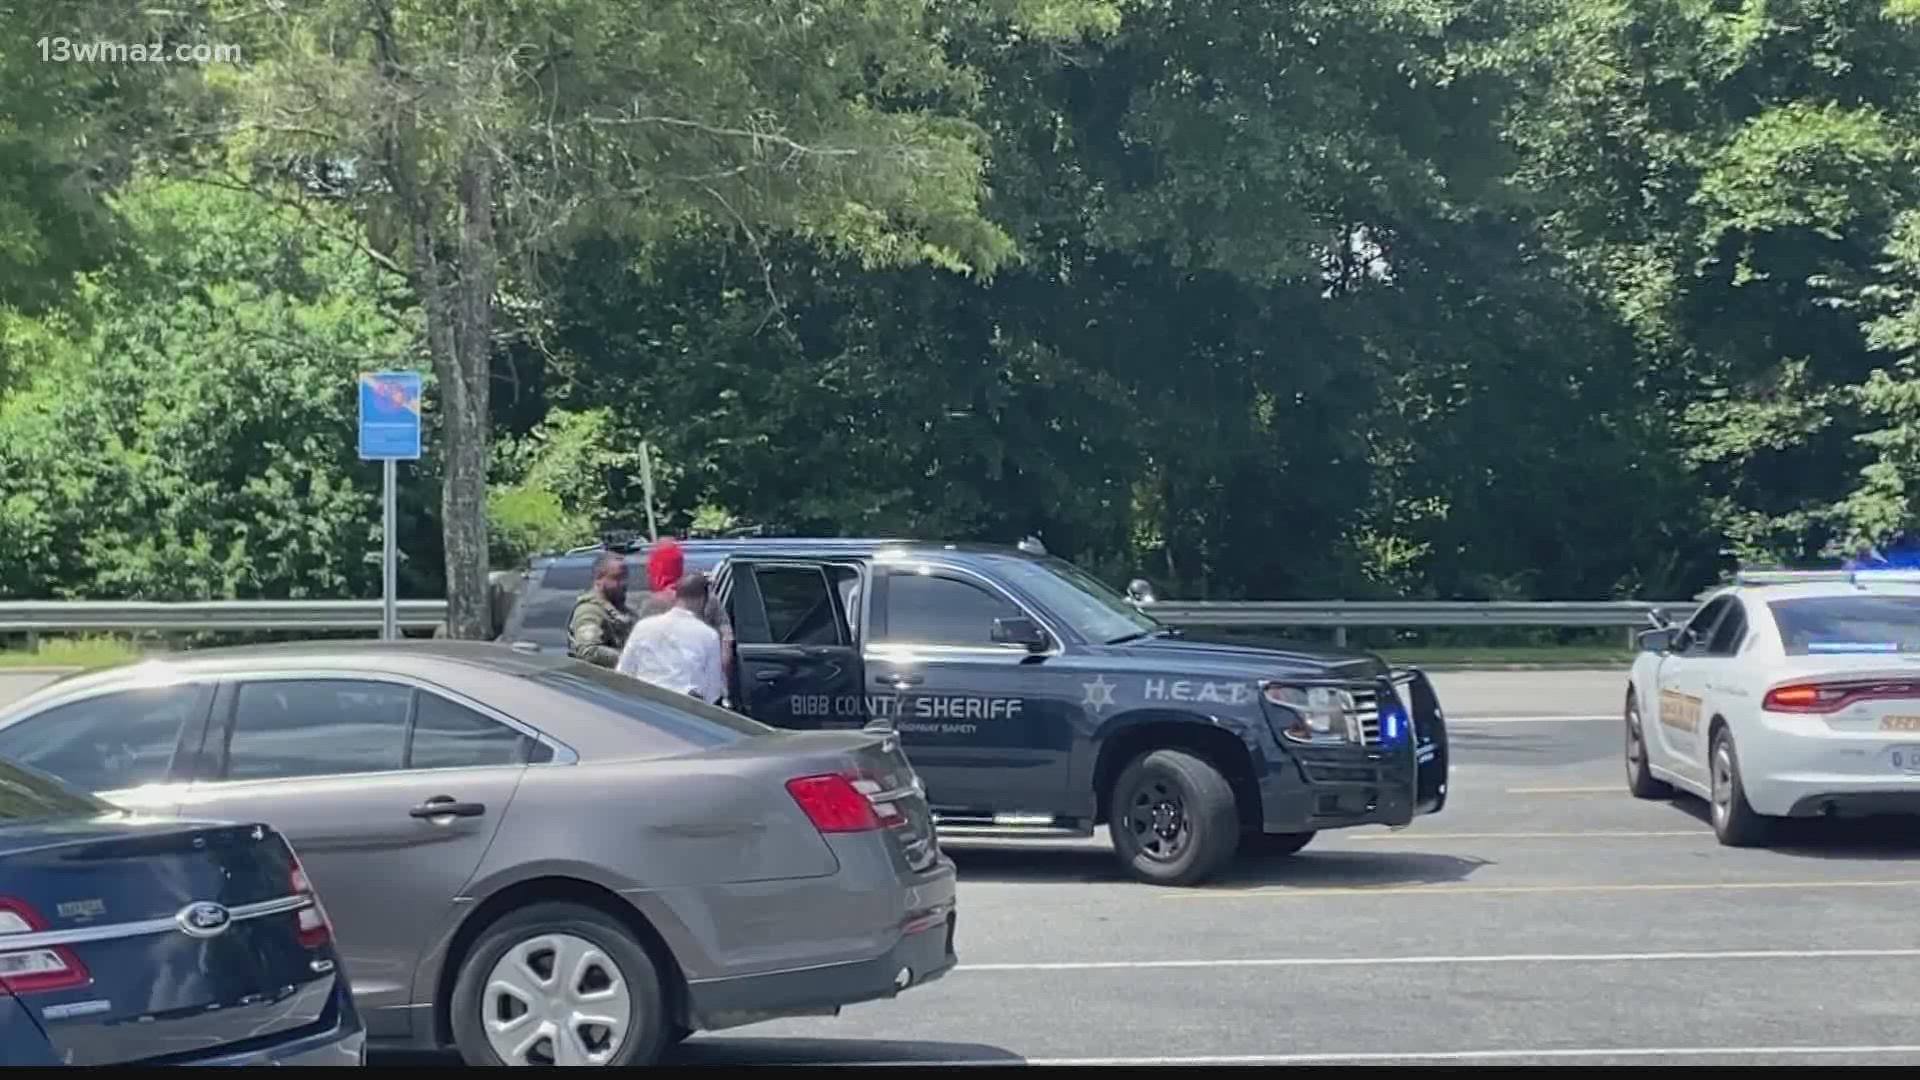 On Tuesday around 1:30 p.m. a car crashed into a tree at the Walmart on Harrison Road. Government officials and neighbors are worried about safety in the area.